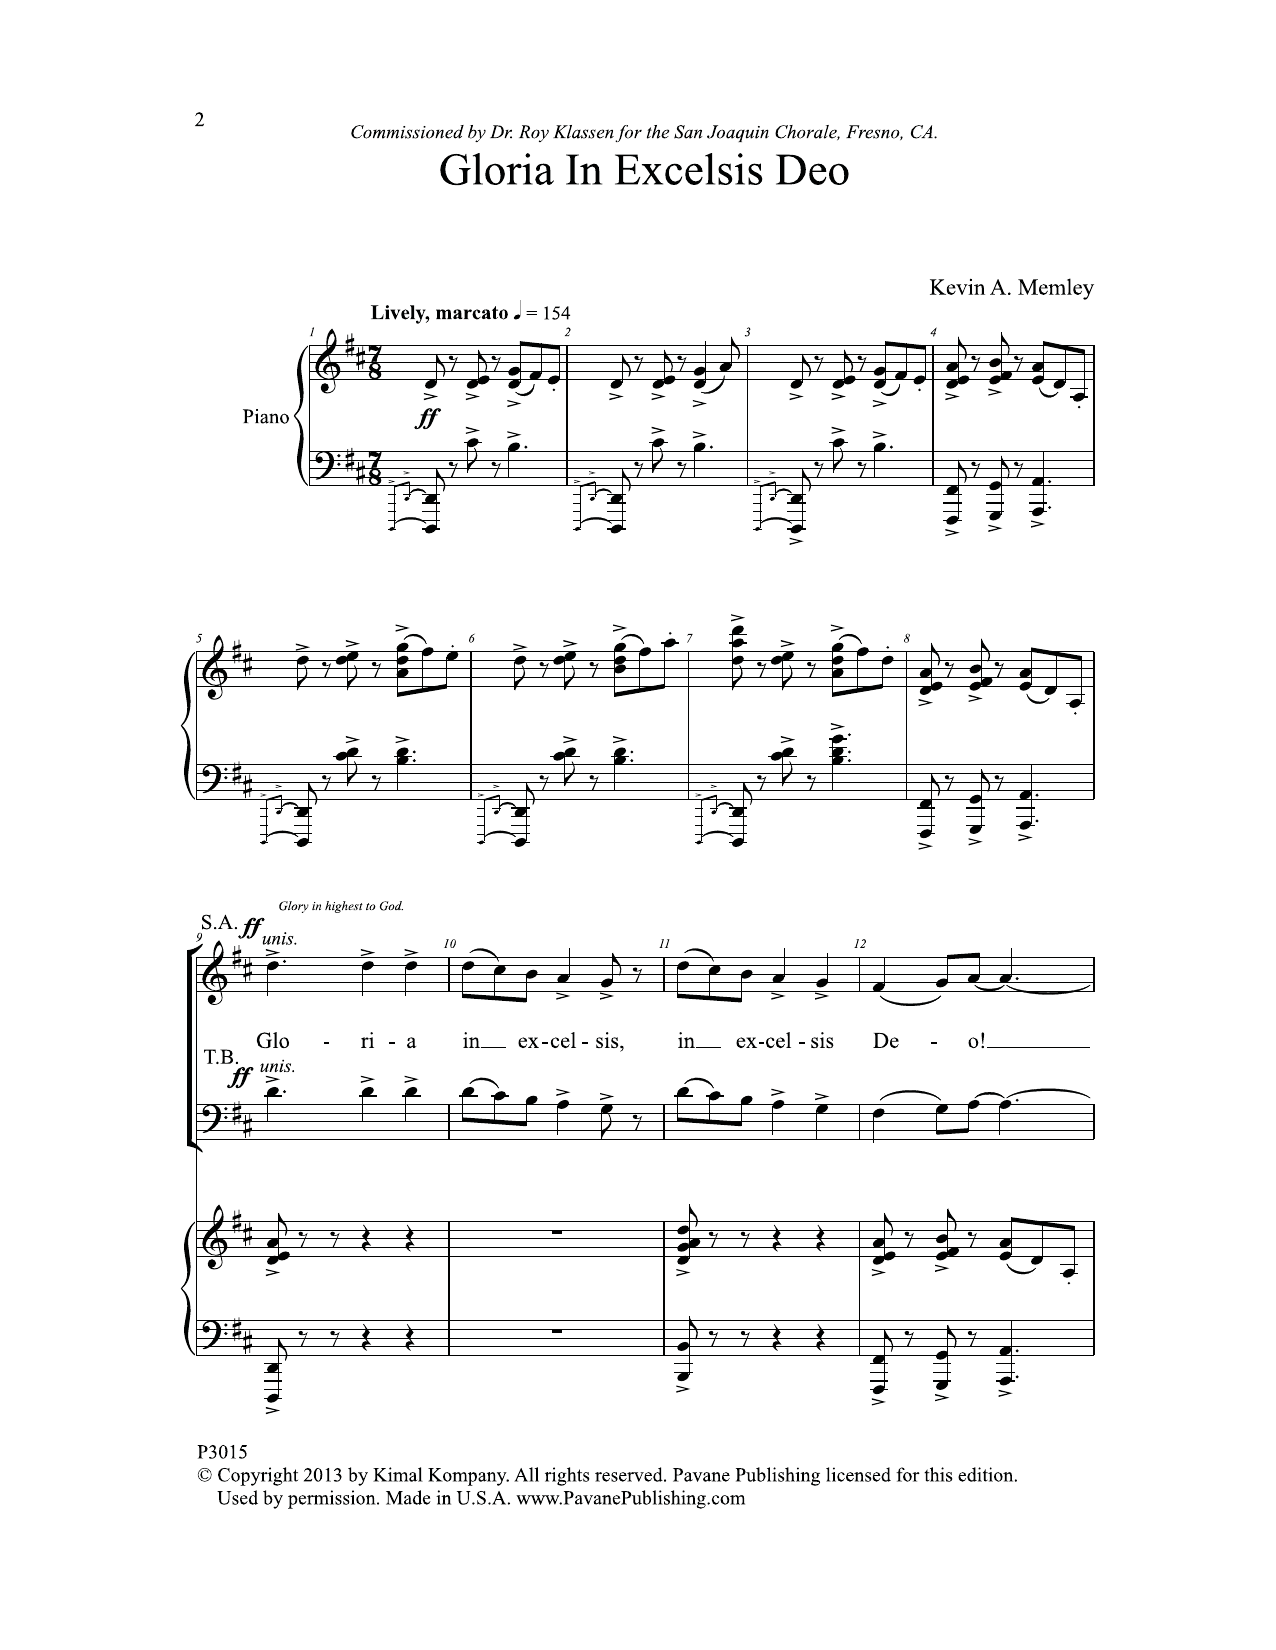 Download Kevin A. Memley Gloria in Excelsis Deo Sheet Music